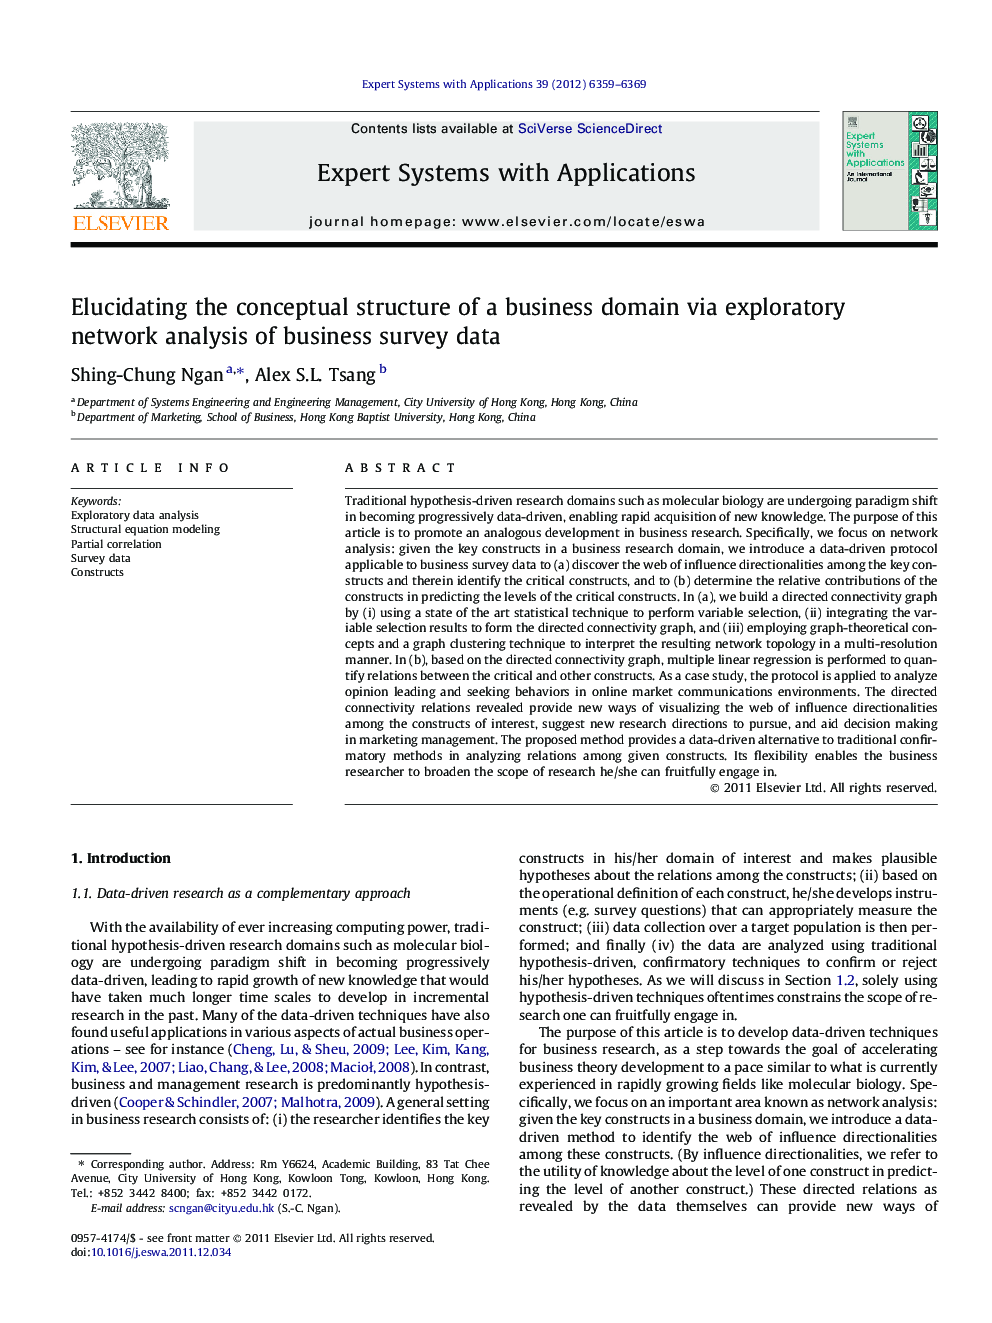 Elucidating the conceptual structure of a business domain via exploratory network analysis of business survey data